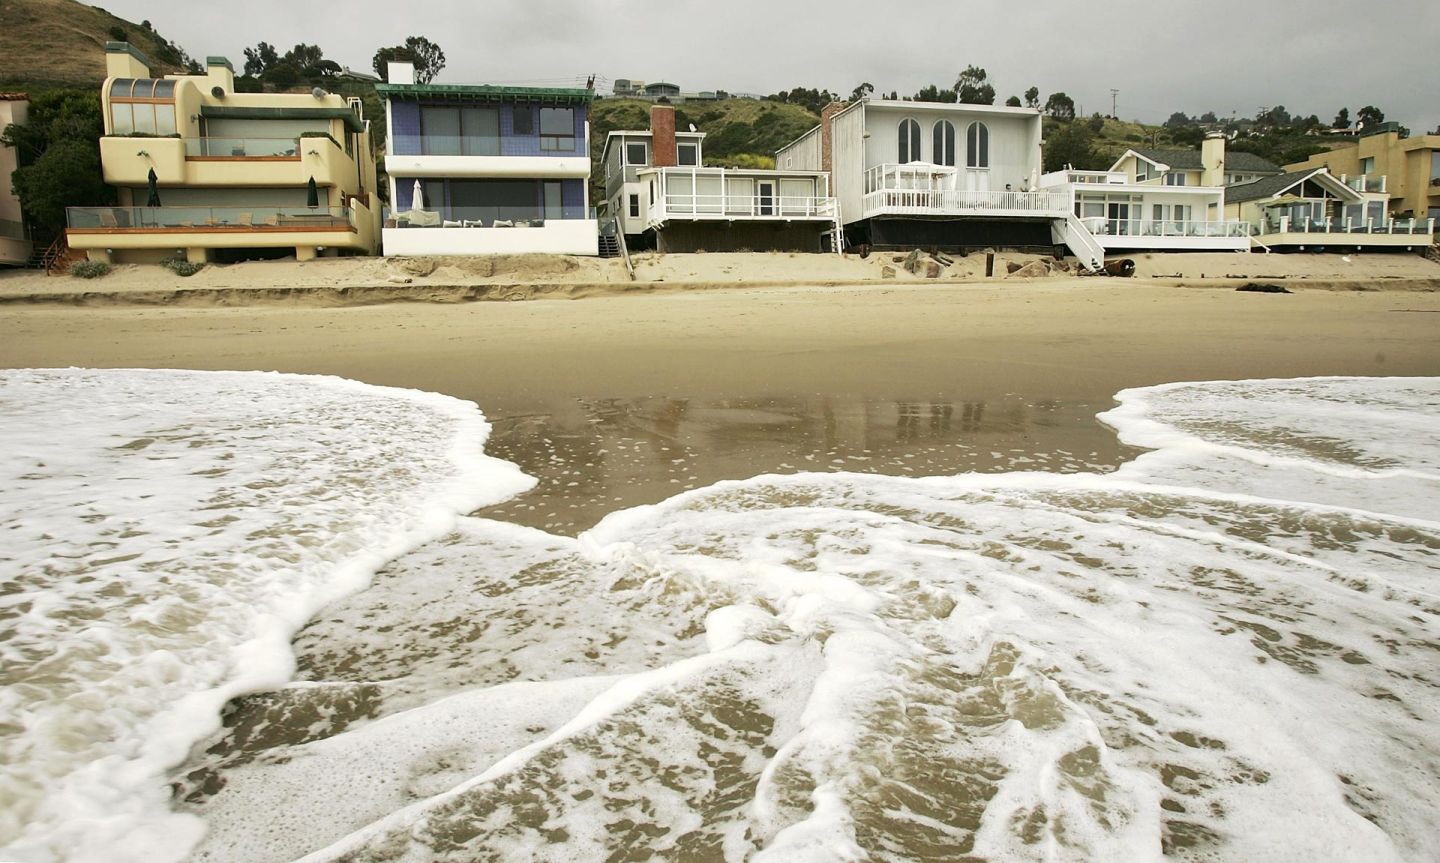 Luxurious beach houses crowd the shoreline hiding Carbon Beach in Malibu. A lengthy legal battle over public access to the beach culminated in 2005, with music producer David Geffen allowing a public pathway across his property in exchange for permits from the Coastal Commission to begin building a Cape Cod-style compound across multiple lots.  David McNew/Getty Images